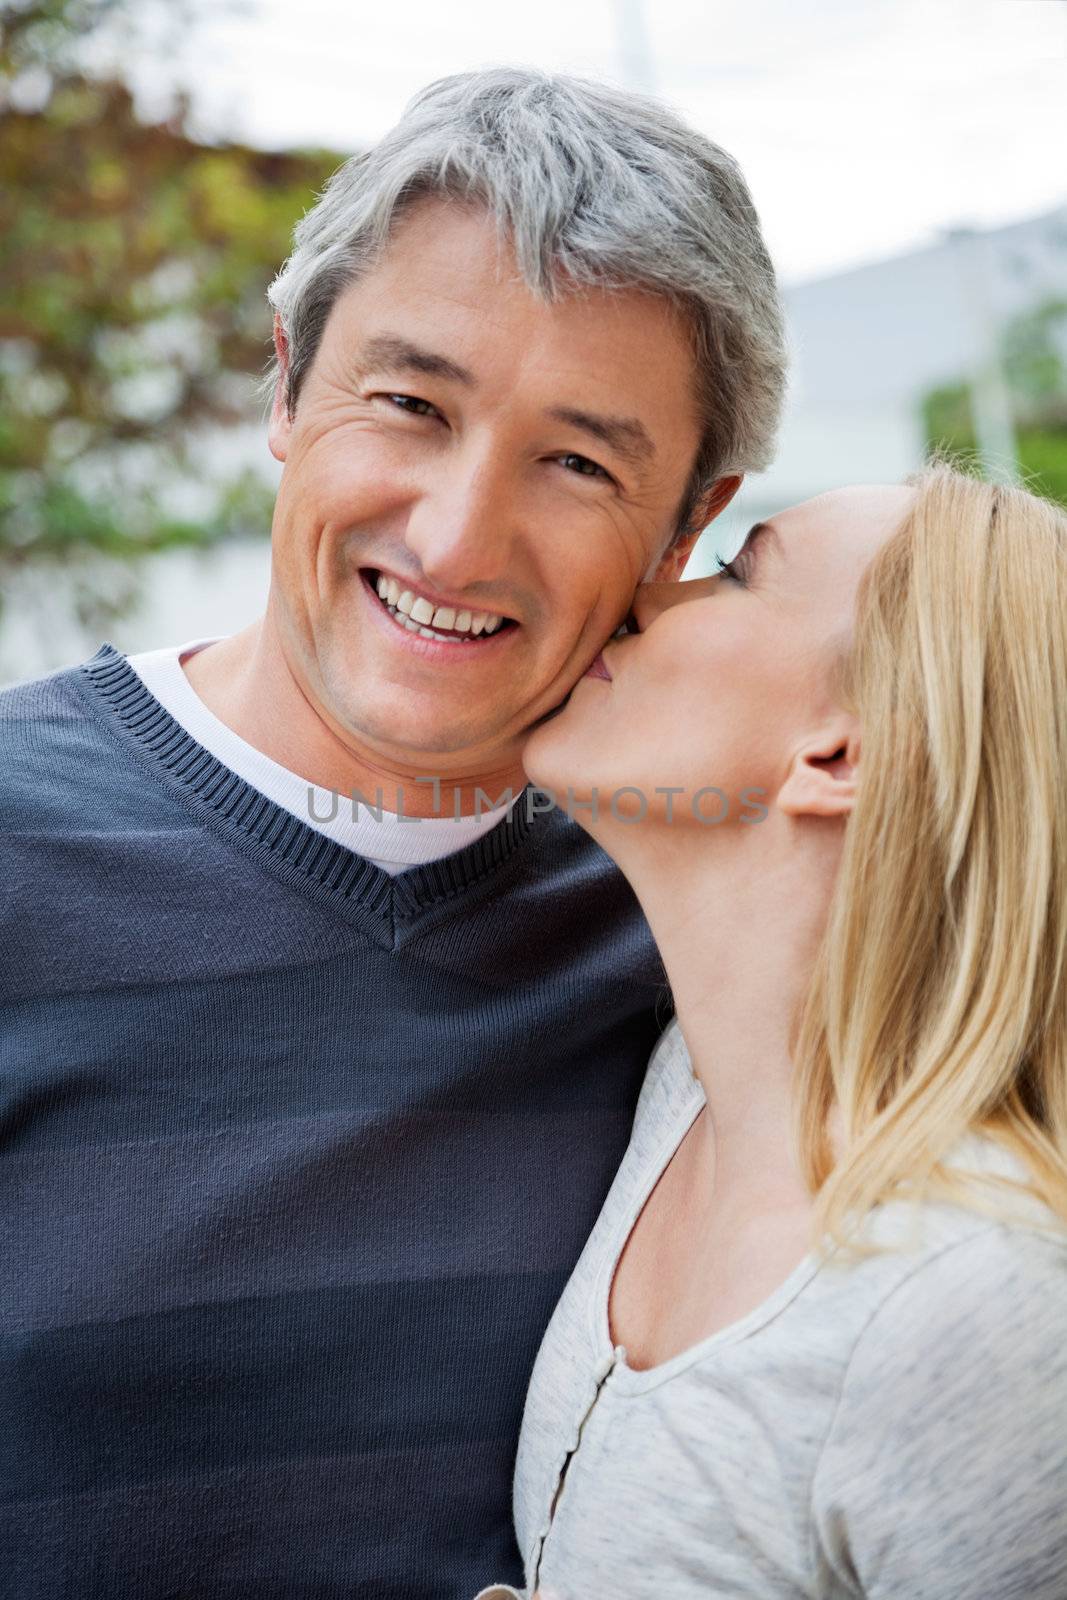 Blond woman kissing a cheerful middle aged man